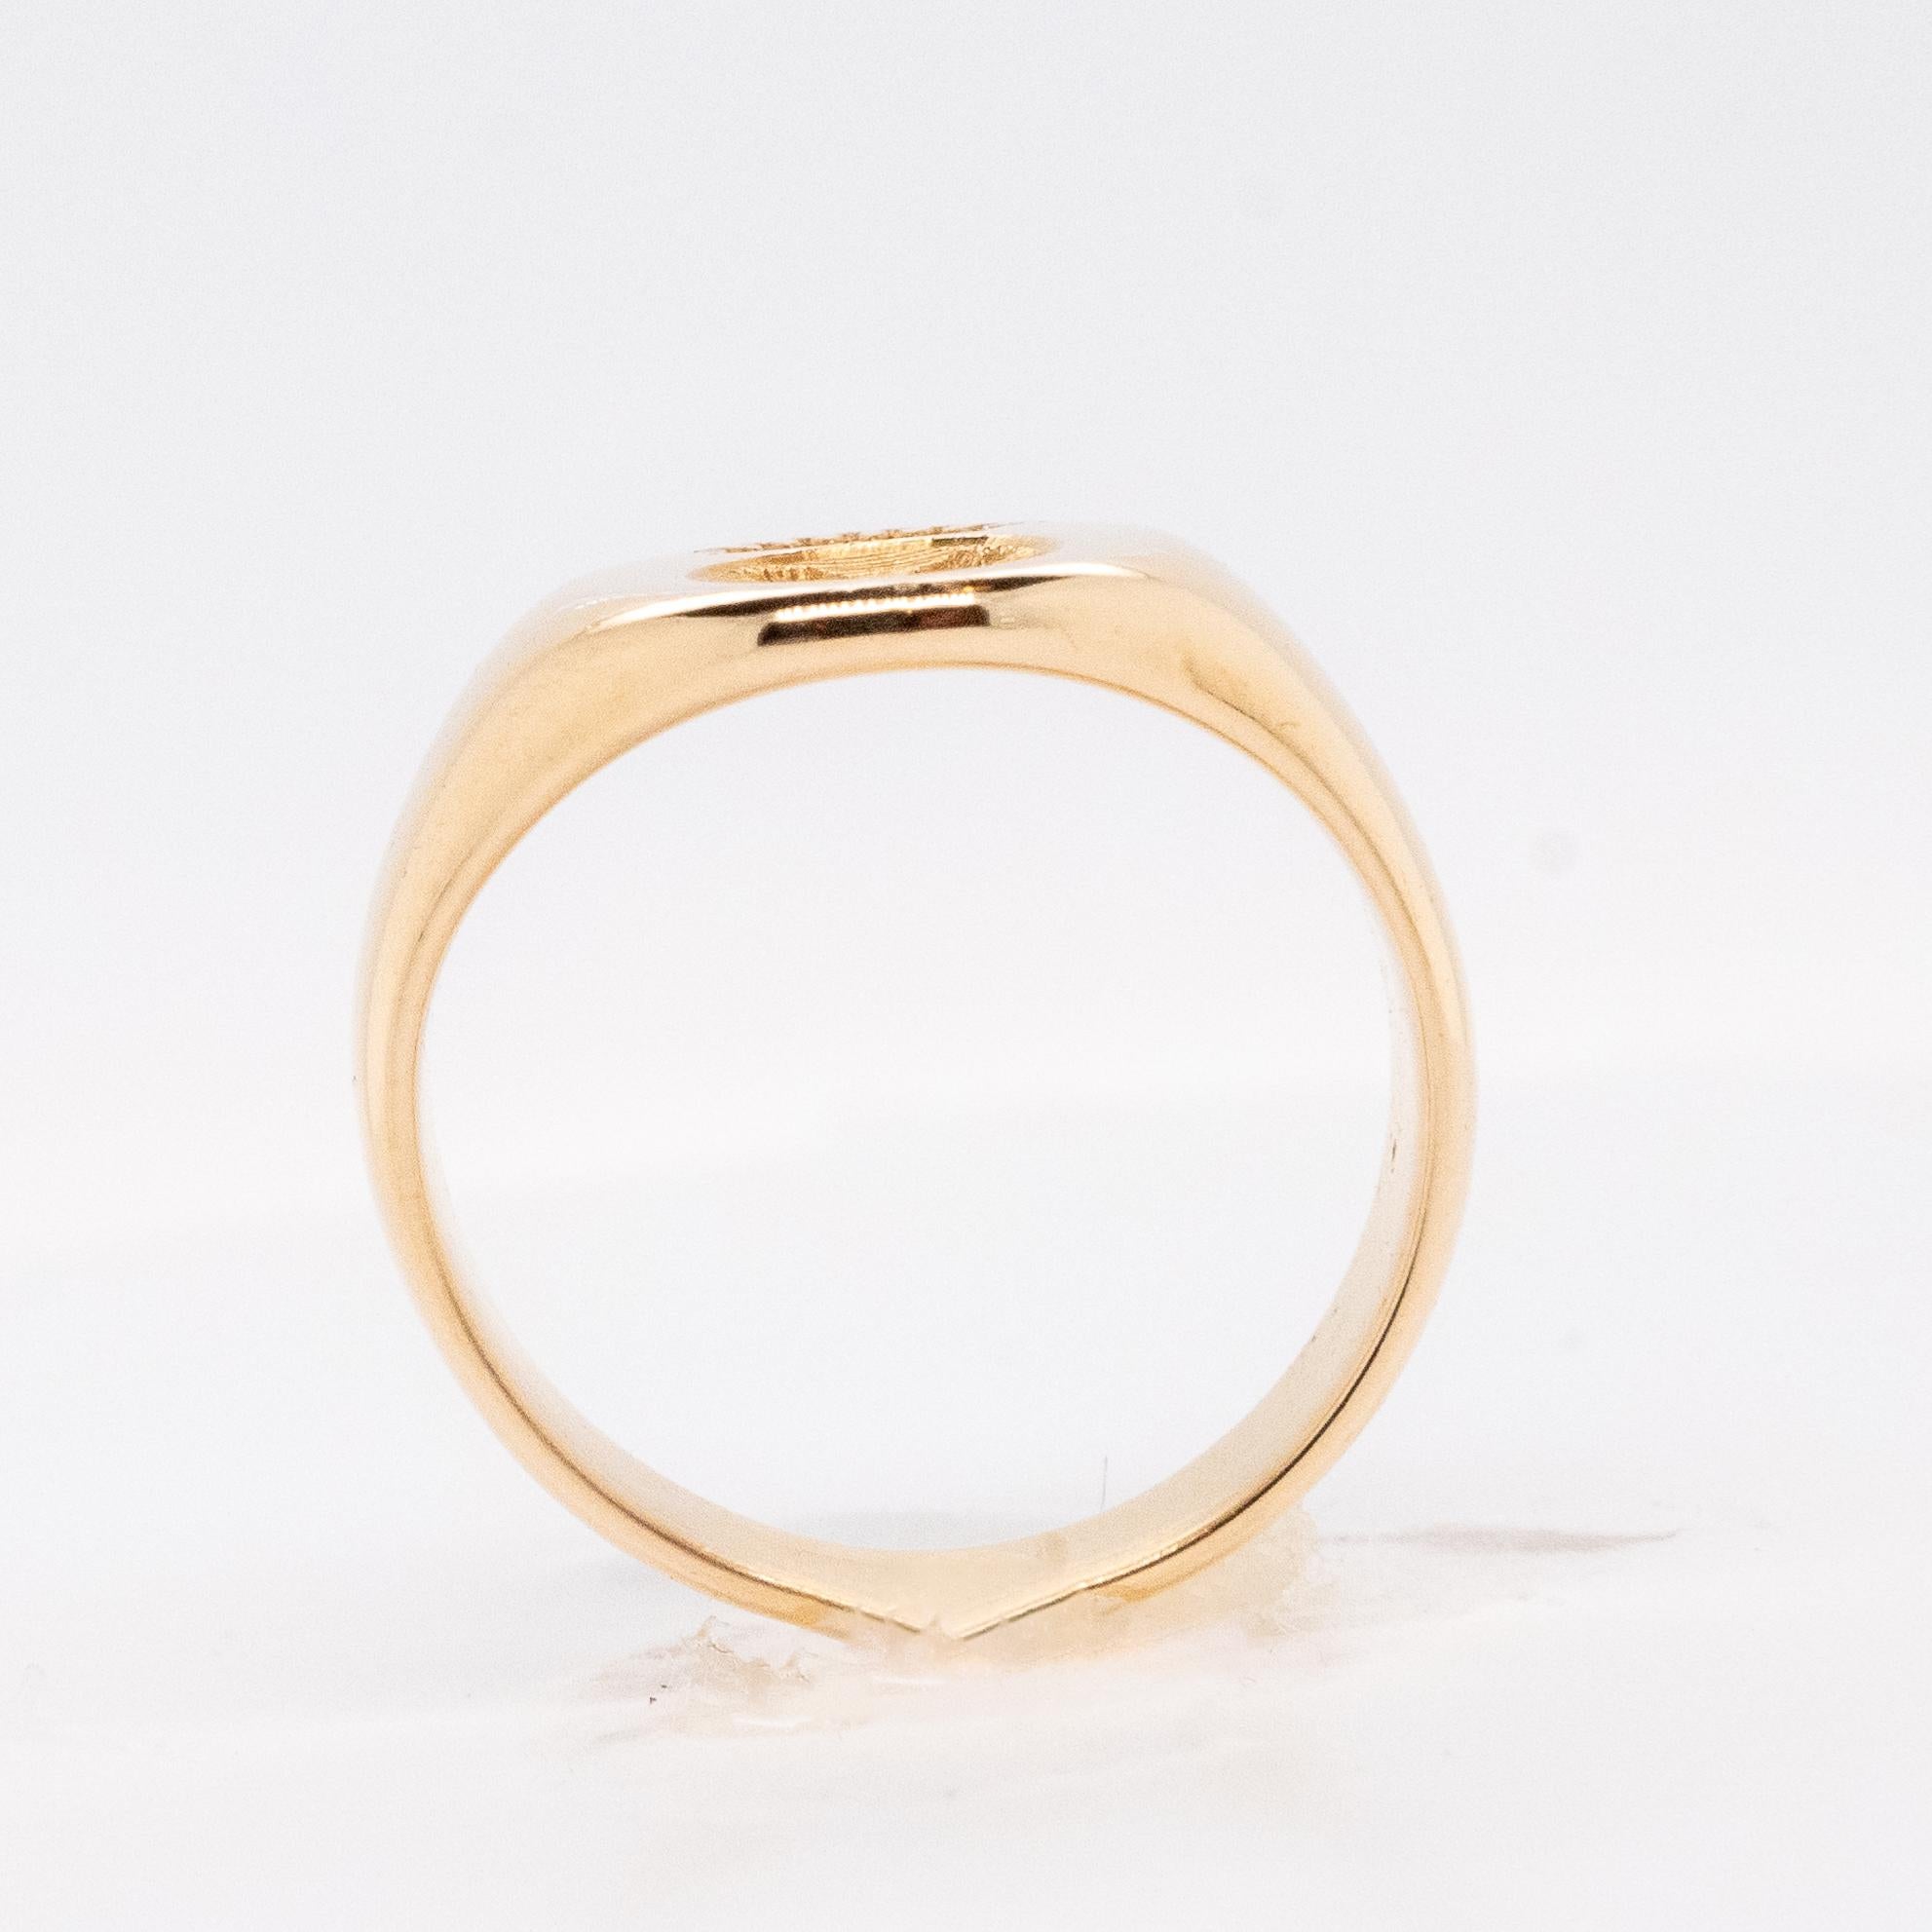 Discover our Comtale signet ring in 18-carat gold, a jewel that fuses traditional craftsmanship with contemporary luxury. Weighing 8.49 grams, this signet ring embodies sophistication and superior quality, underlined by the richness of its 18-carat